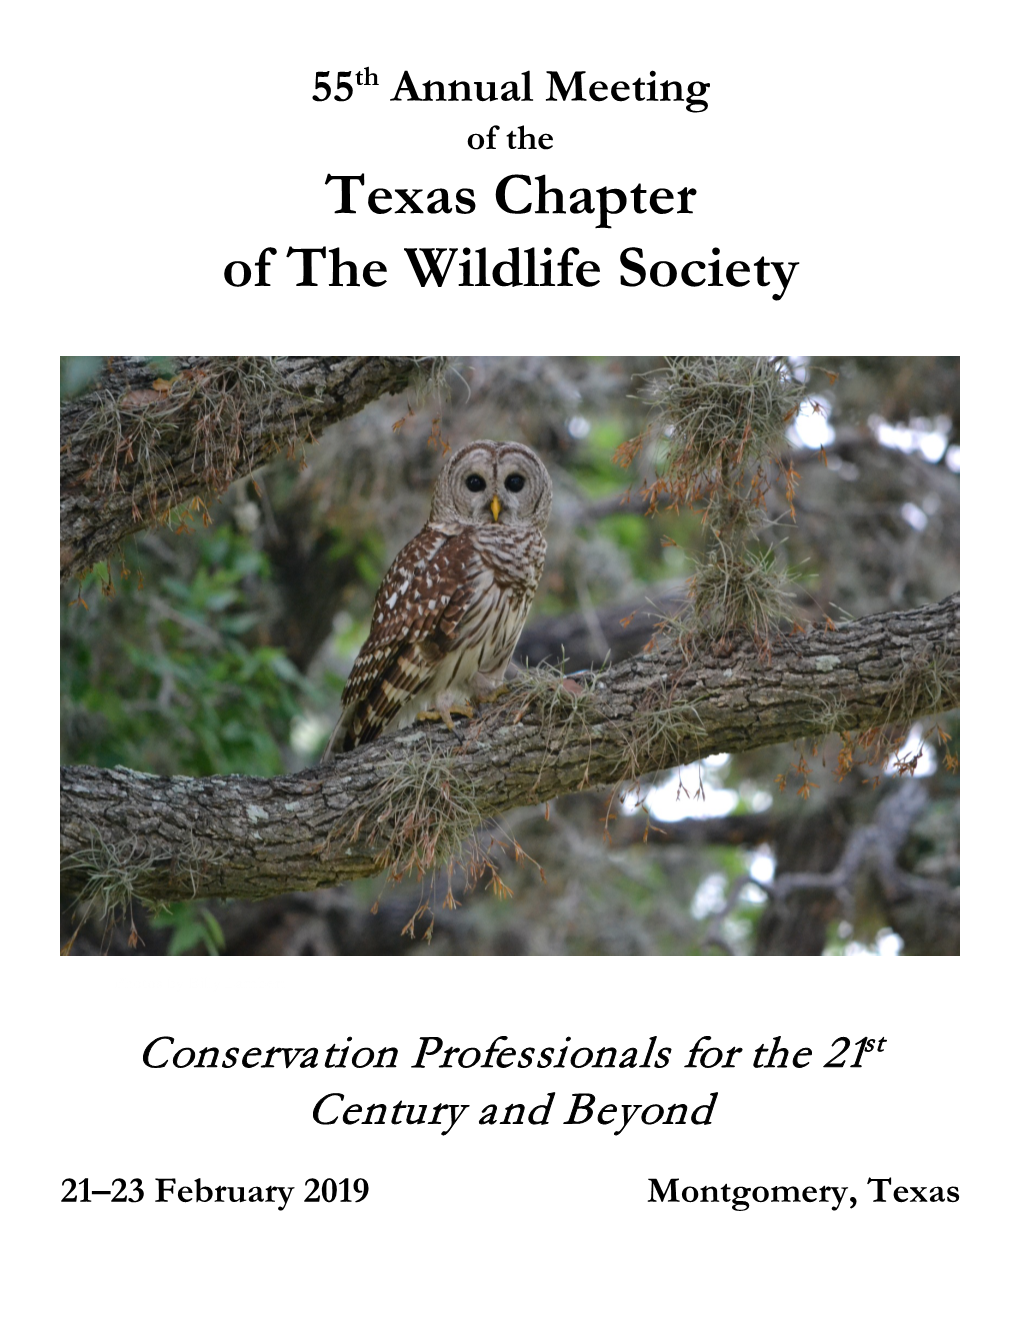 55Th Annual Meeting of the Texas Chapter of the Wildlife Society